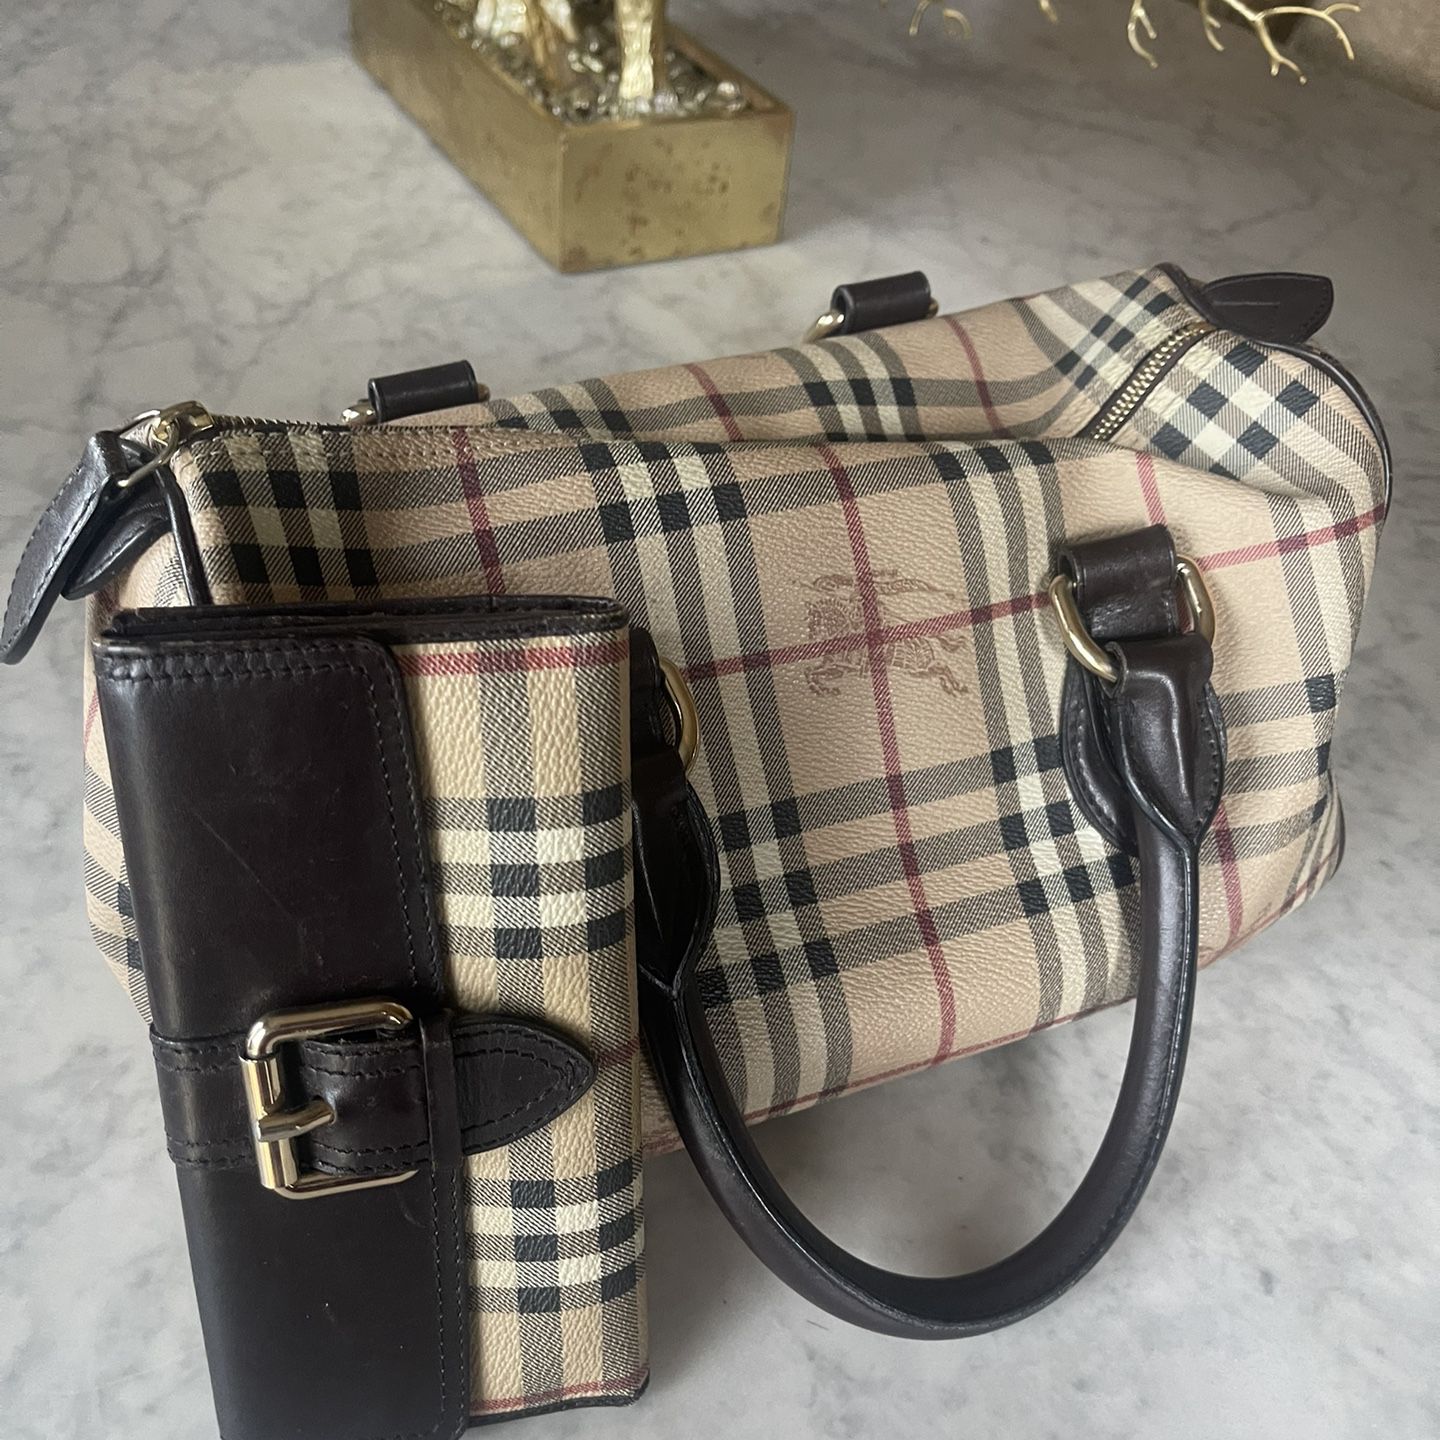 Burberry Bag And Wallet 